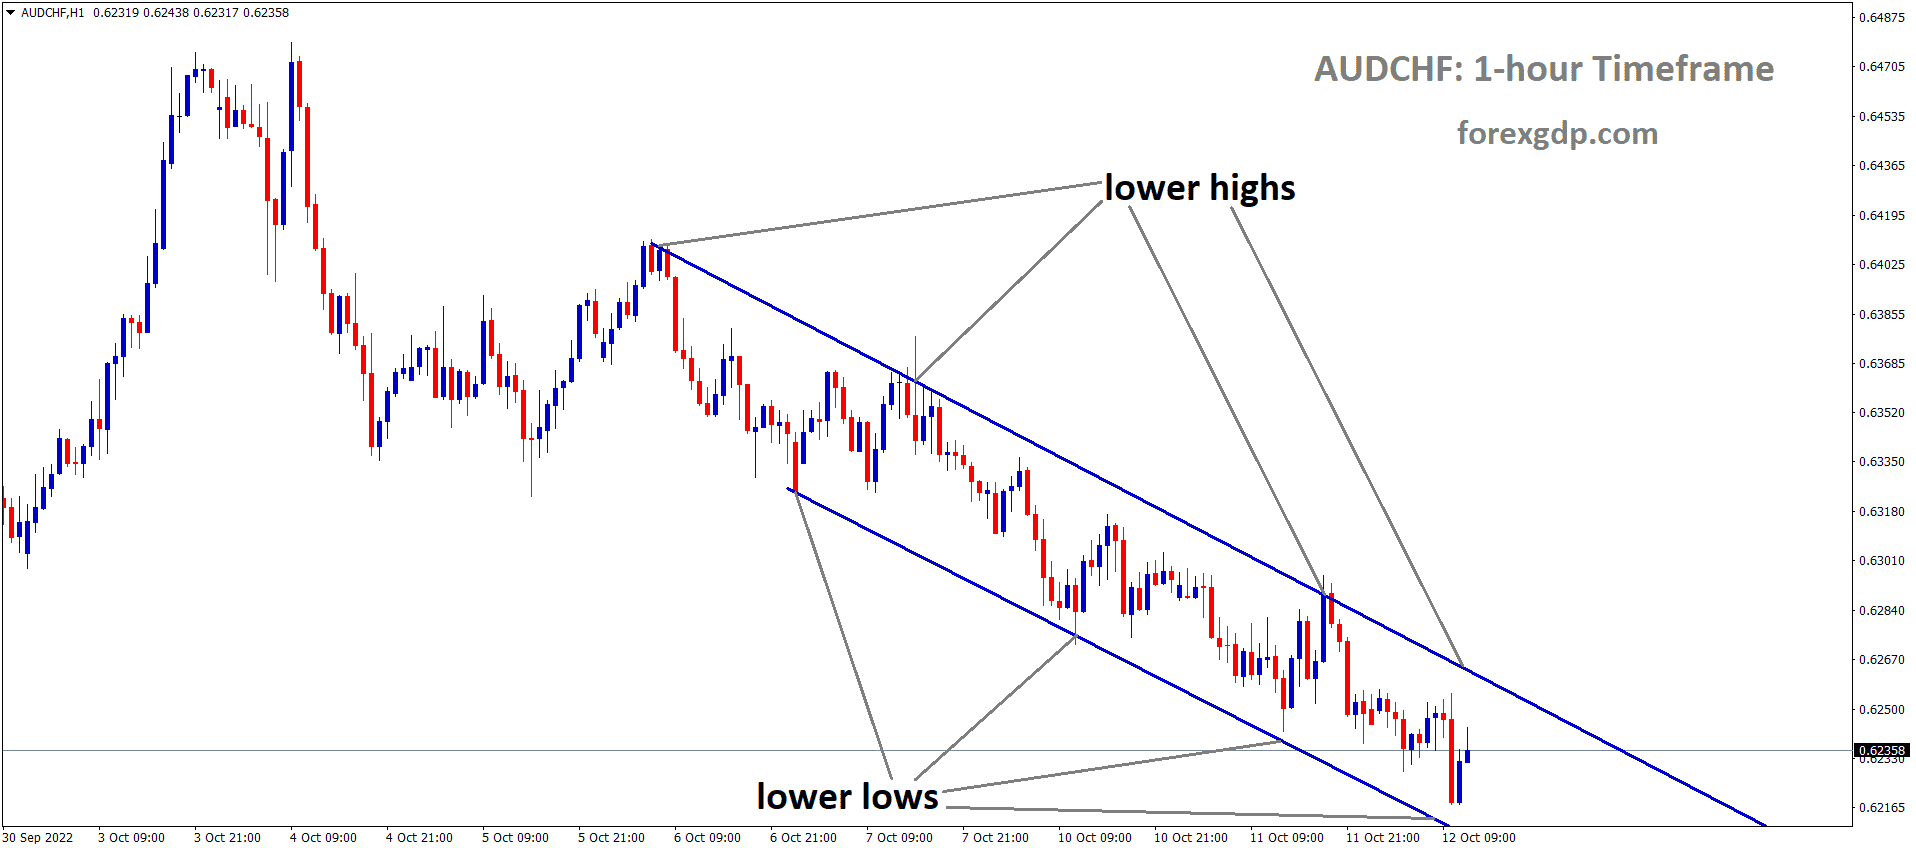 AUDCHF is moving in the Descending channel and the market has rebounded from the lower low area of the channel.